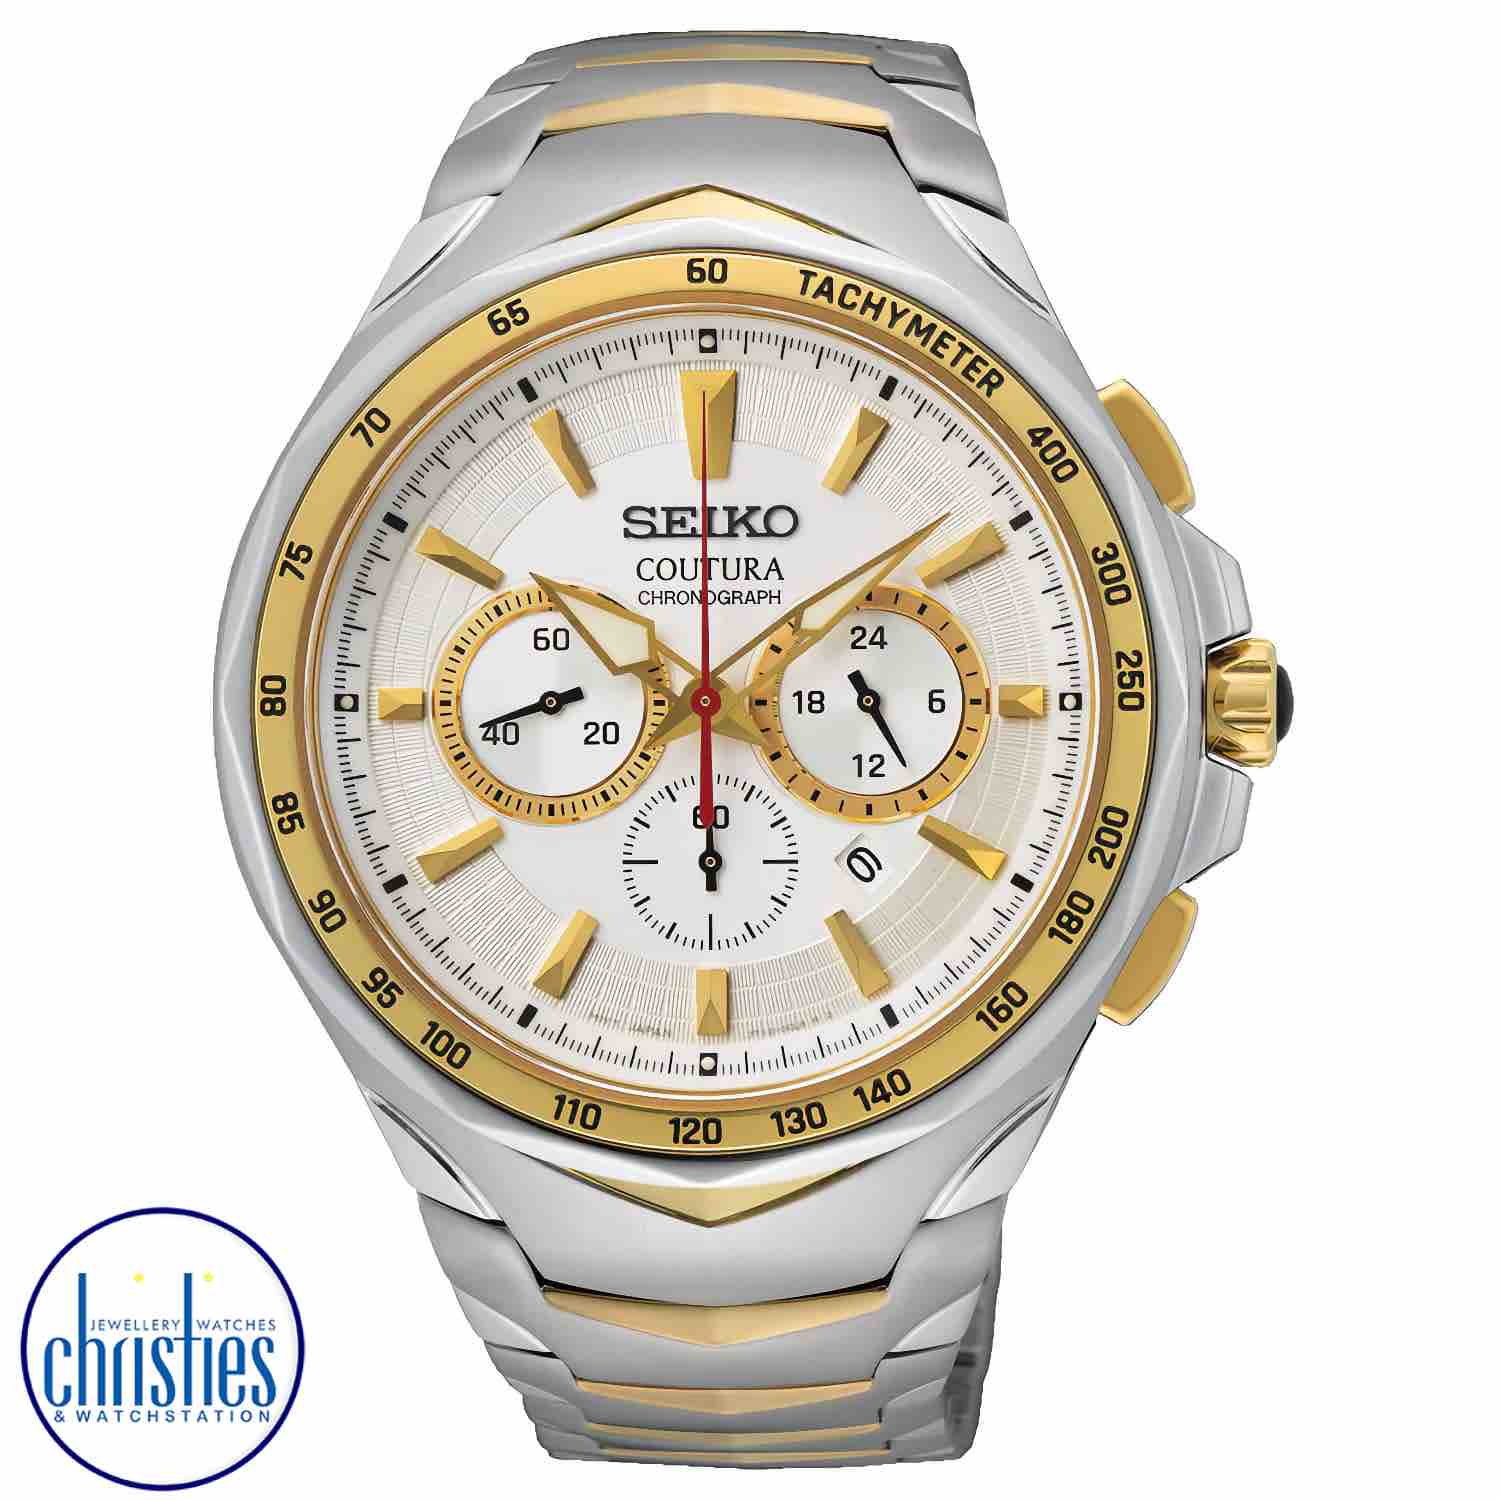 SRWZ24P-9 Seiko Coutura Chronograph Two-Tone Watch. This  Seiko Coutura Chronograph features a white dial with gold-toned markers and highlights with ‘LumiBrite’ luminescent hands.